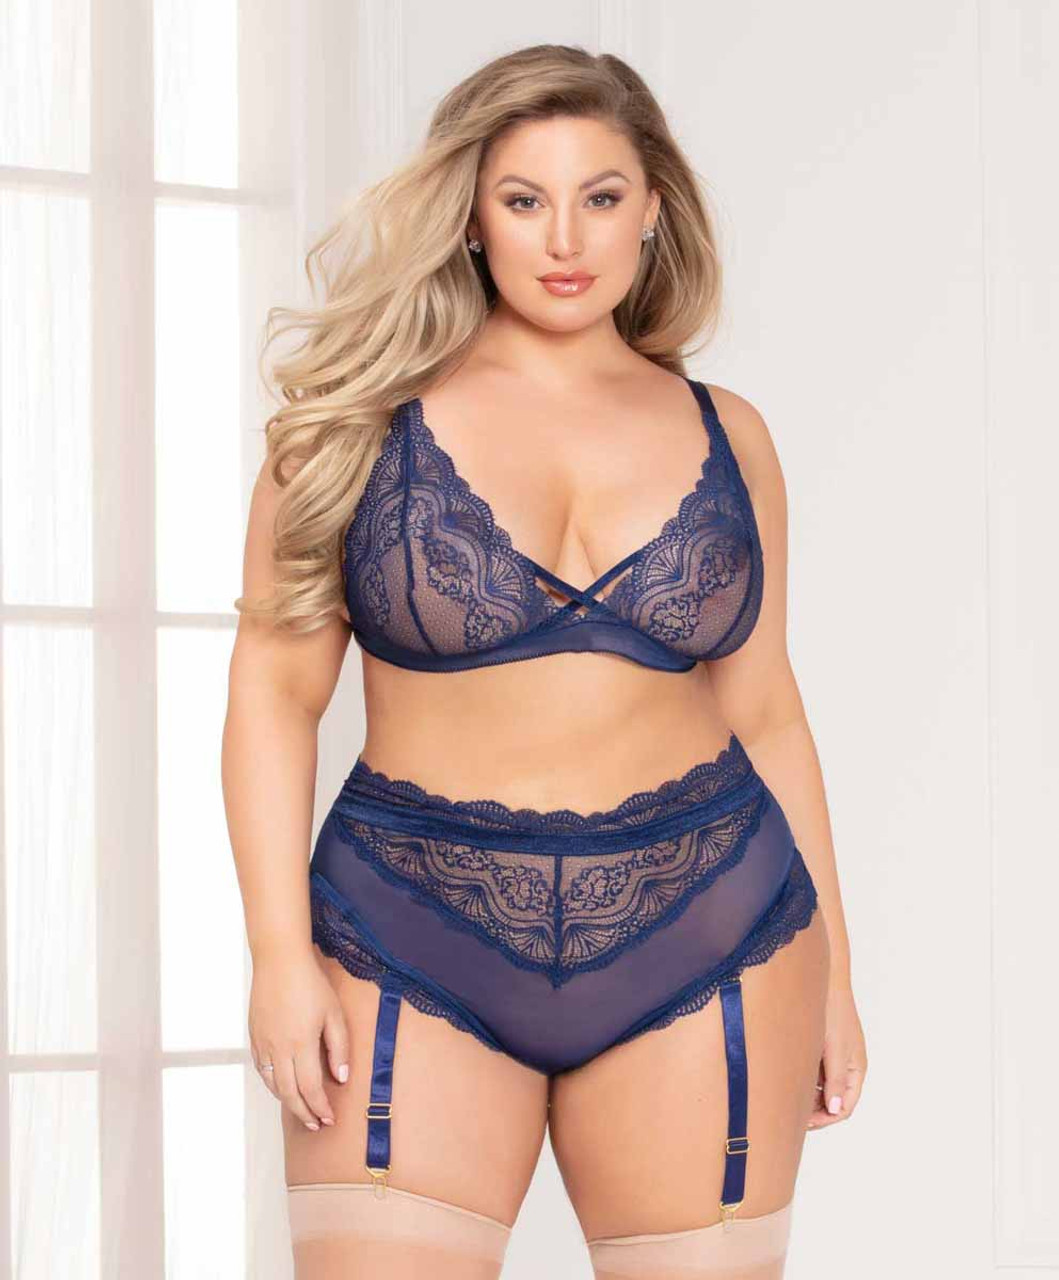 Smart And Sexy Plus Size Lace & Mesh Bralette, Style SA1016